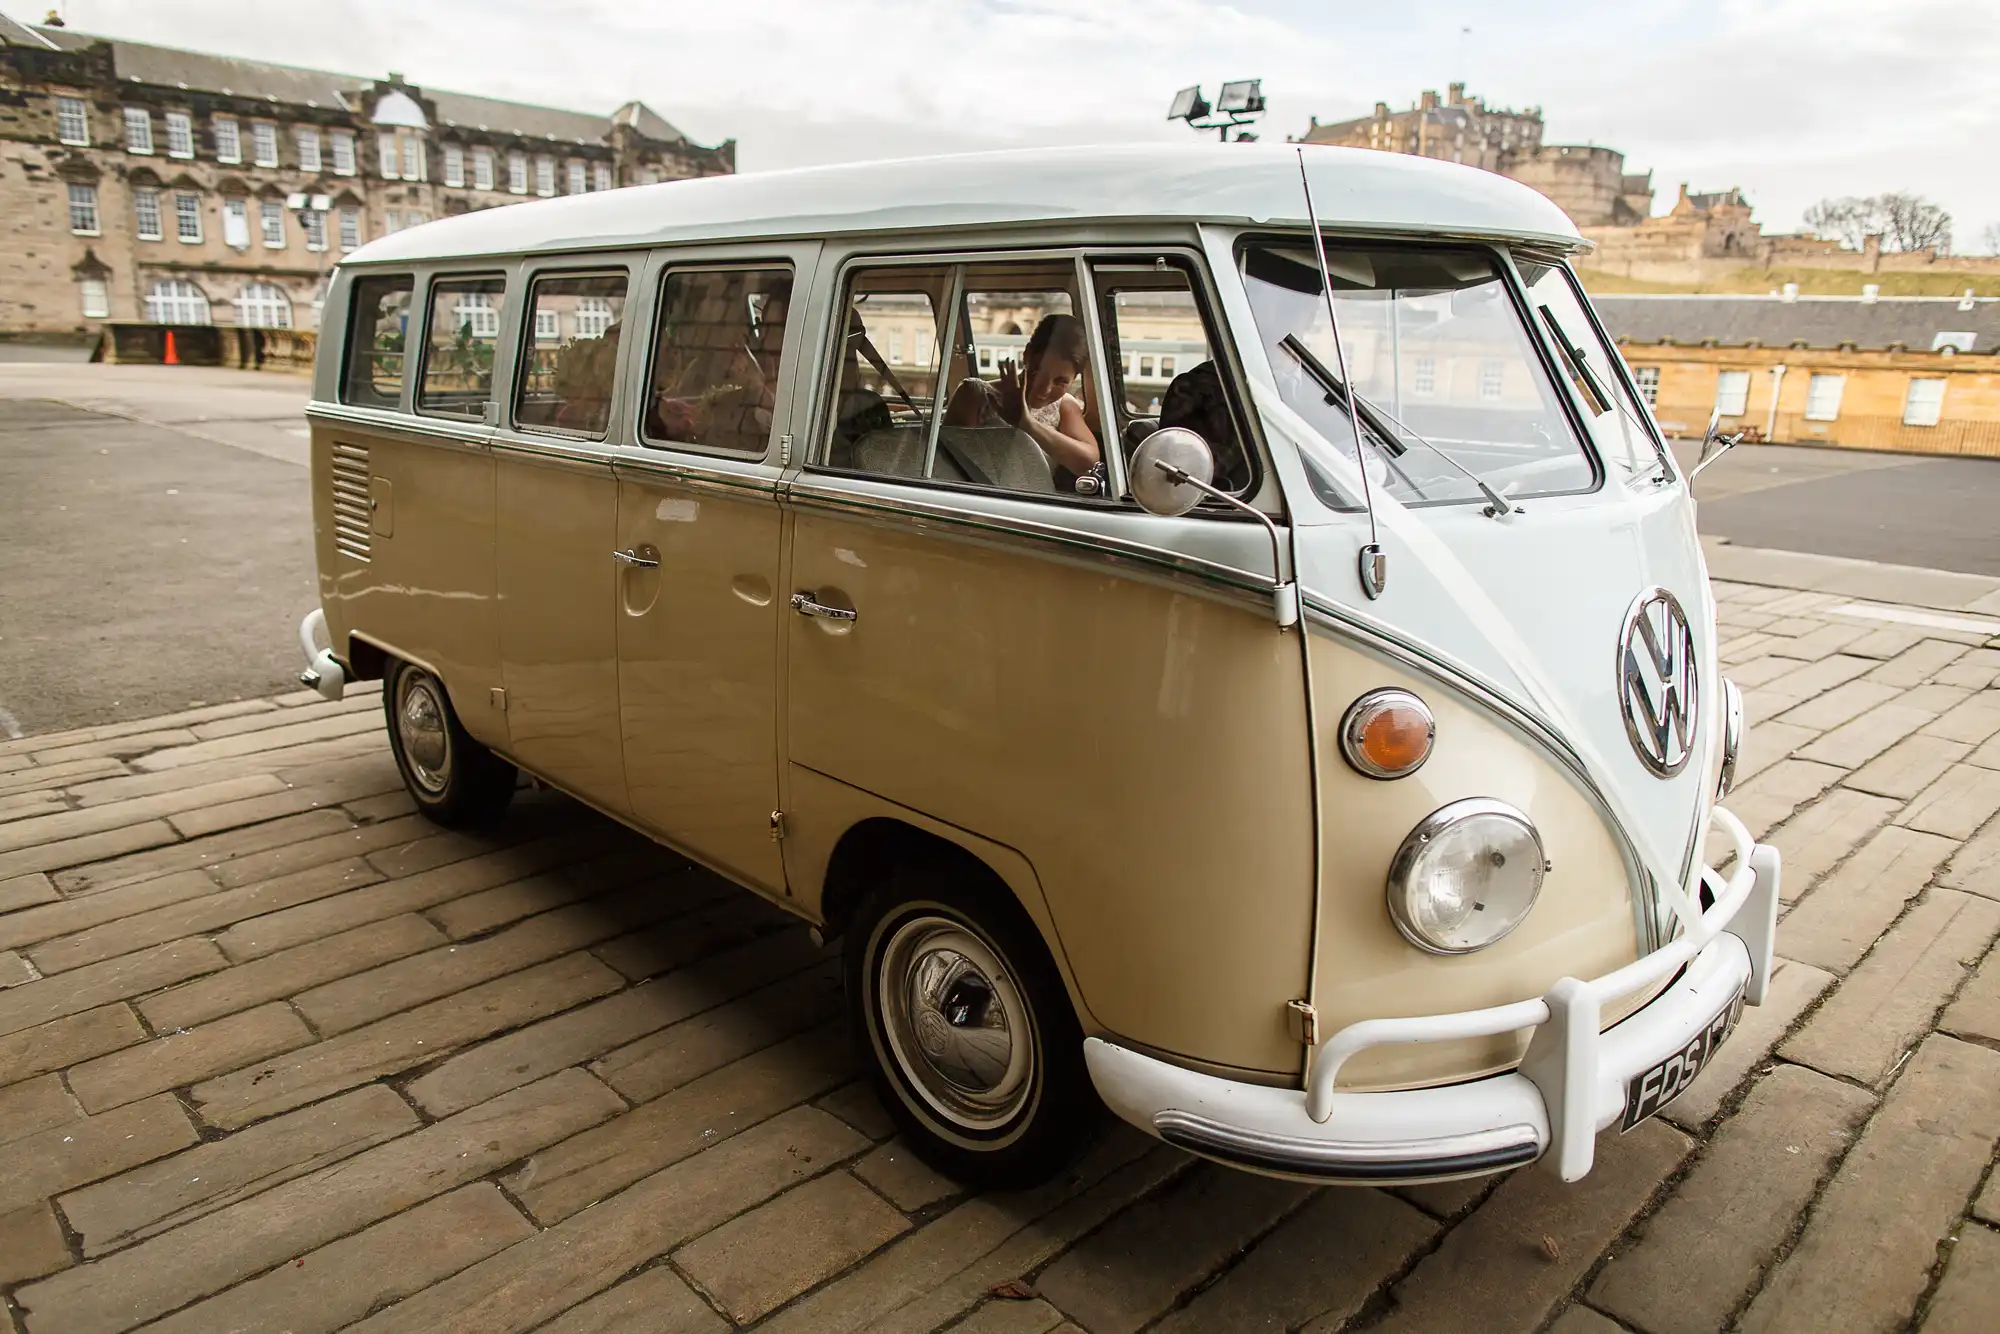 A vintage beige volkswagen van parked on a cobblestone street with a woman sitting in the driver's seat and a castle visible in the background.